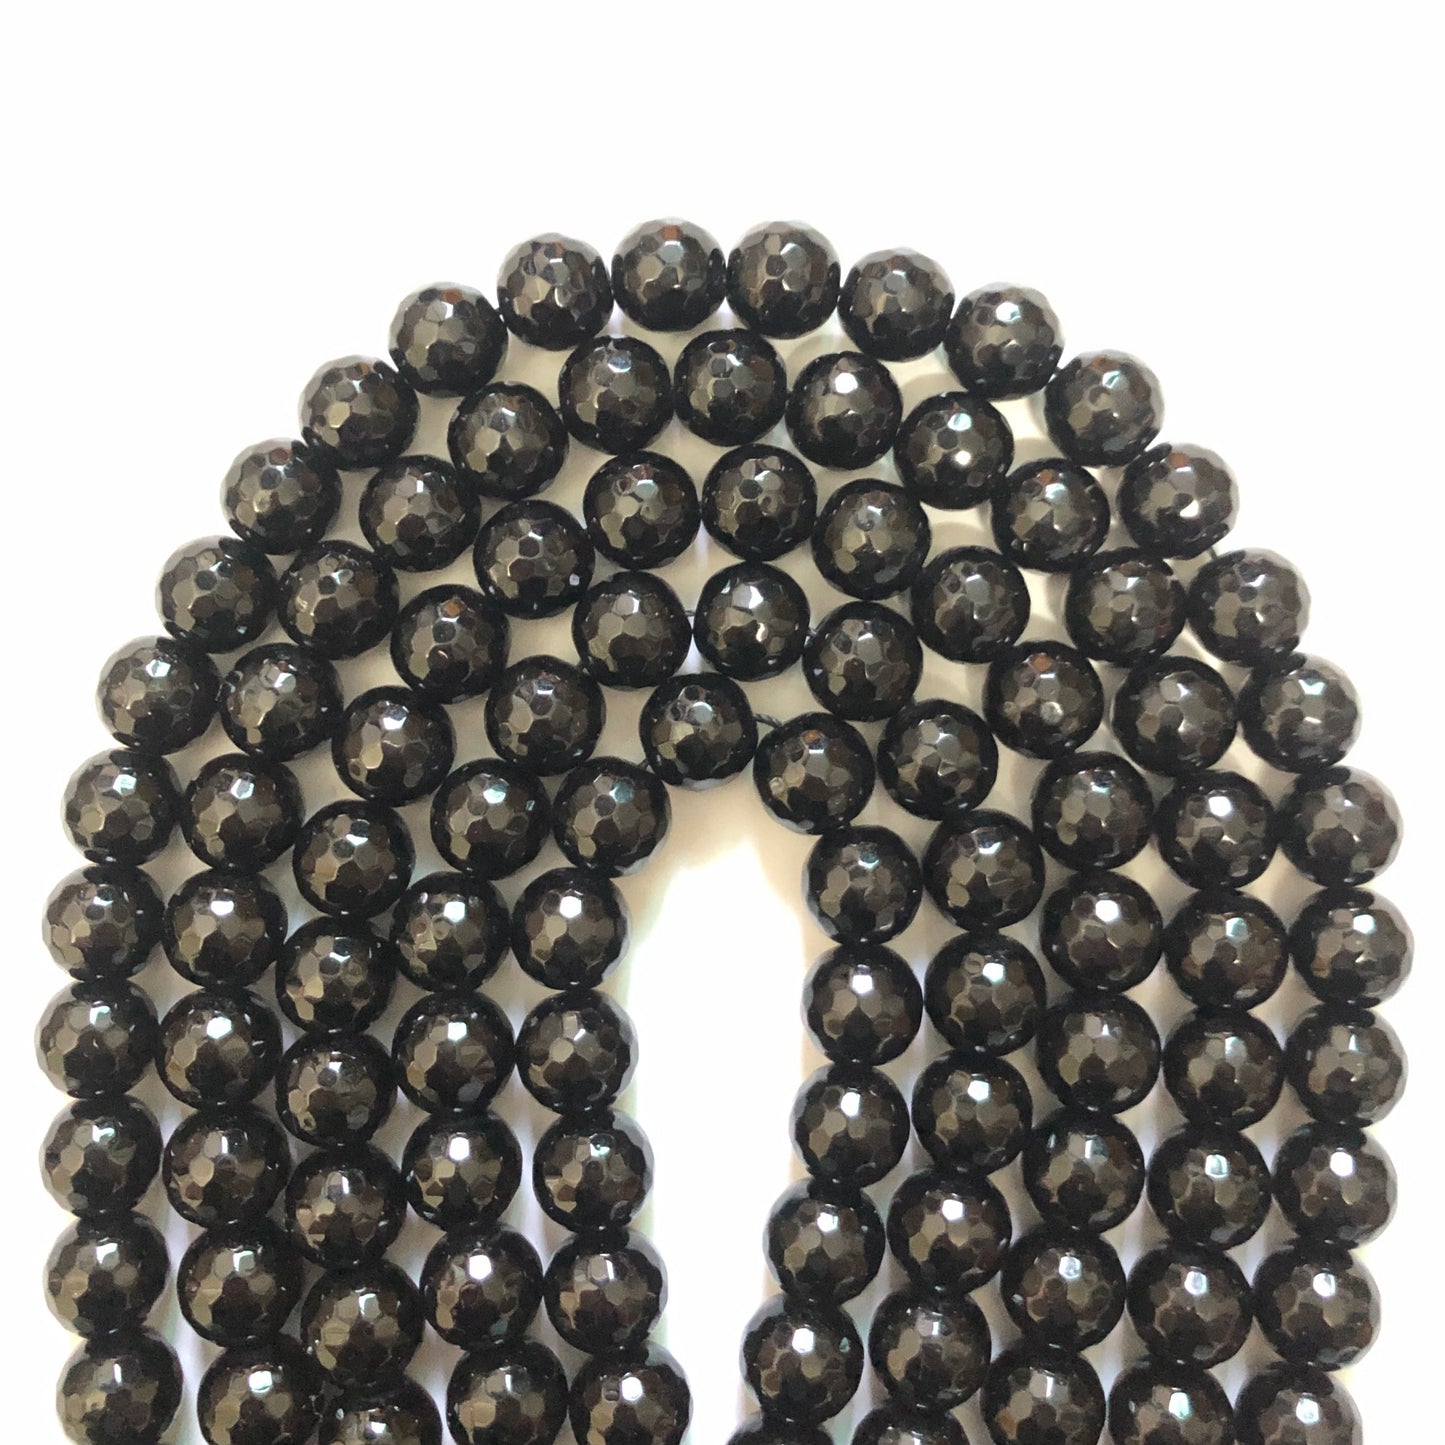 2 Strands/lot 12mm Black Faceted Jade Stone Beads Stone Beads 12mm Stone Beads Faceted Jade Beads New Beads Arrivals Charms Beads Beyond